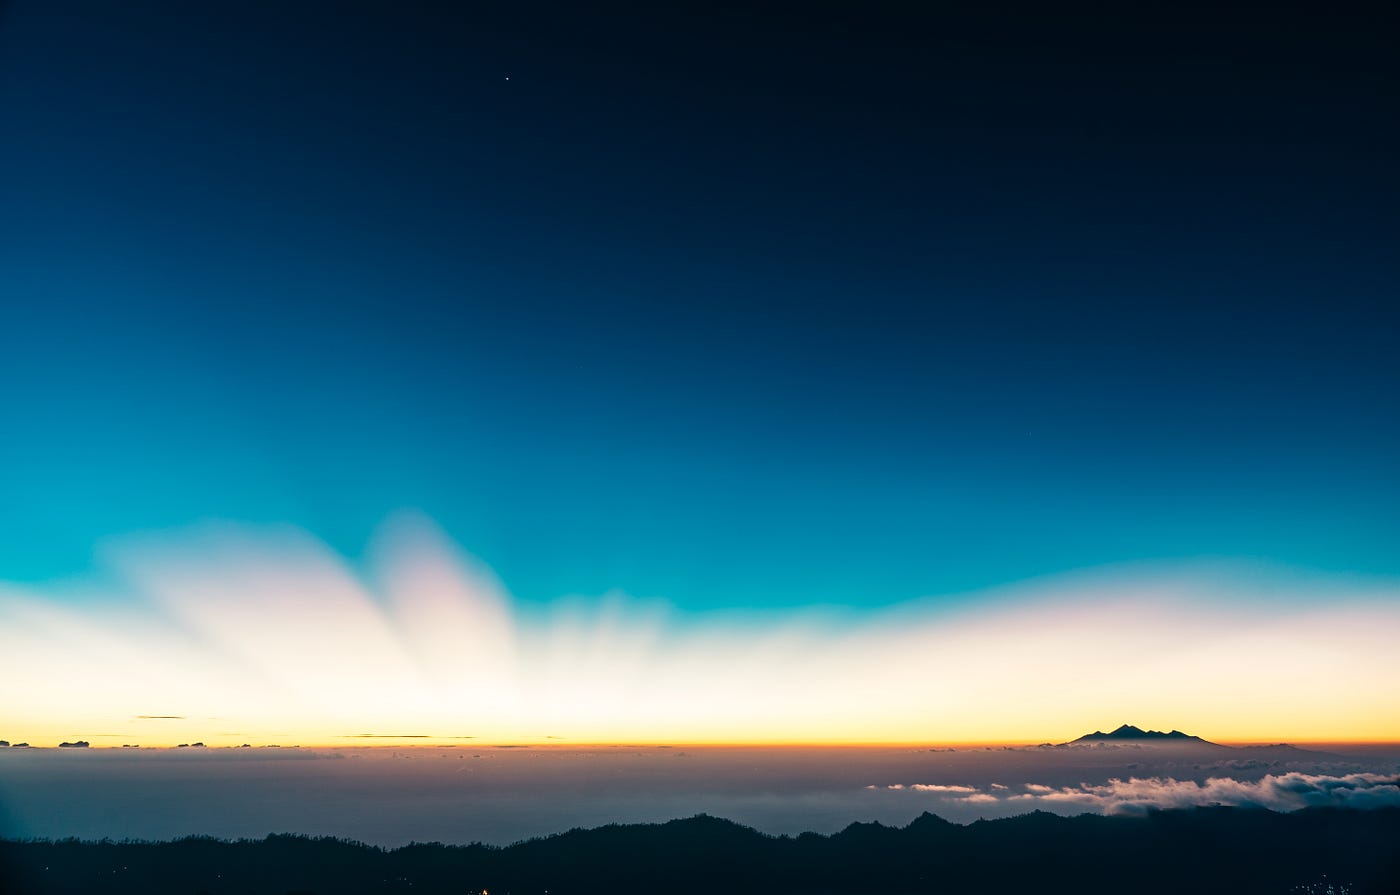 Image of a distant horizon with light coming up from it